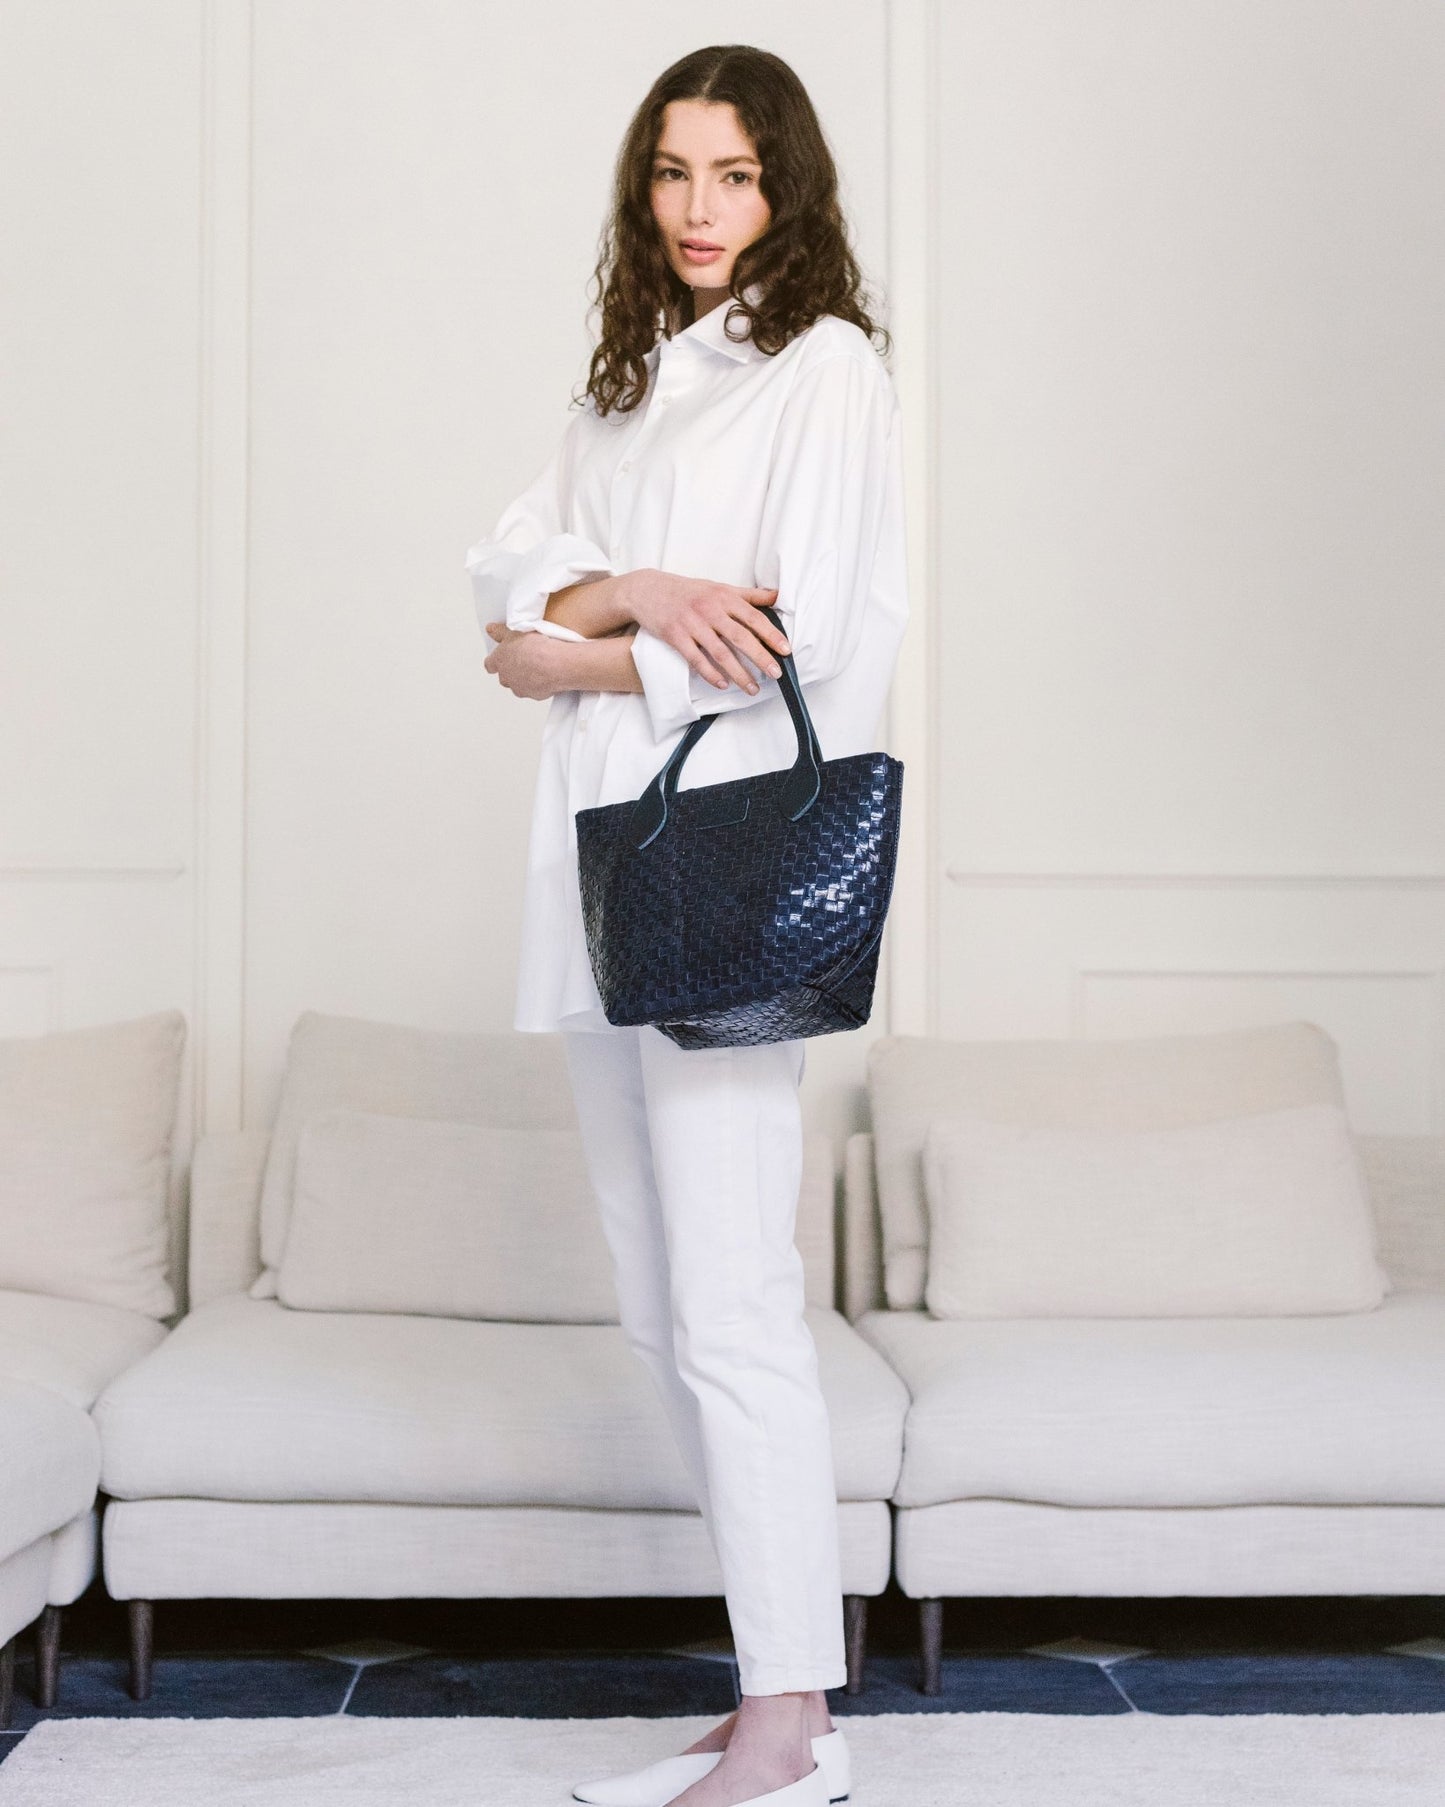 A woman is standing in front of a white sofa. She is wearing a small UASHMAMA washable paper woven tote bag on her left arm. The bag is dark blue.